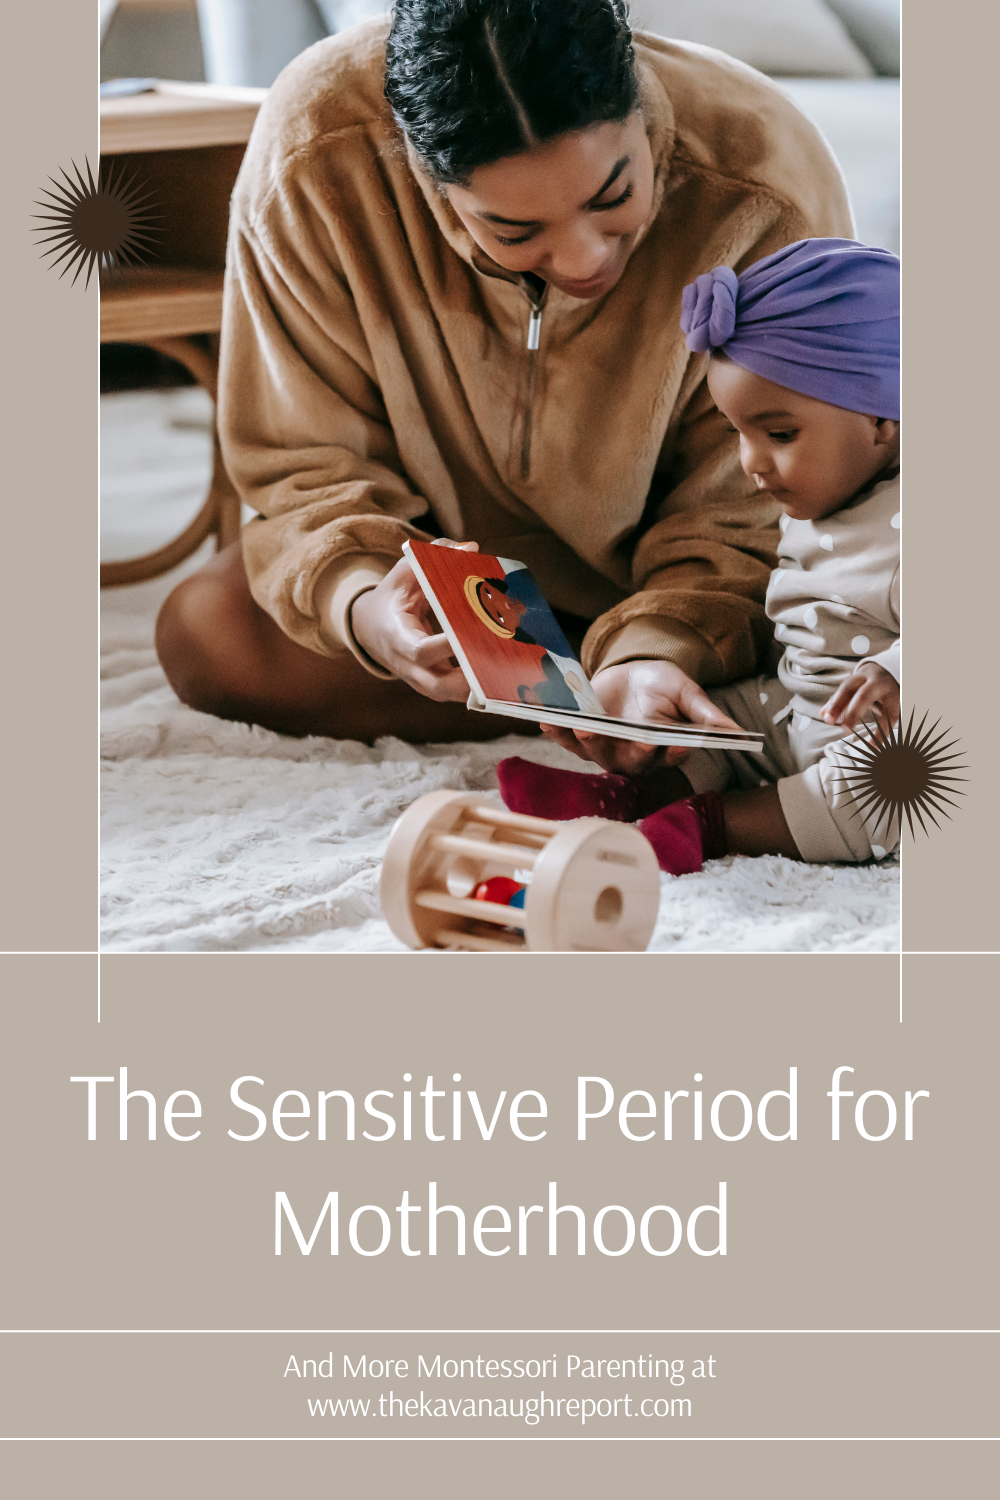 Welcoming a new baby is such a time of joy, excitement, and so many unknowns. Montessori parenting can help you understand not only your baby but also yourself. Are we in a sensitive period for motherhood? Is the work of motherhood made easier during this time of great change?